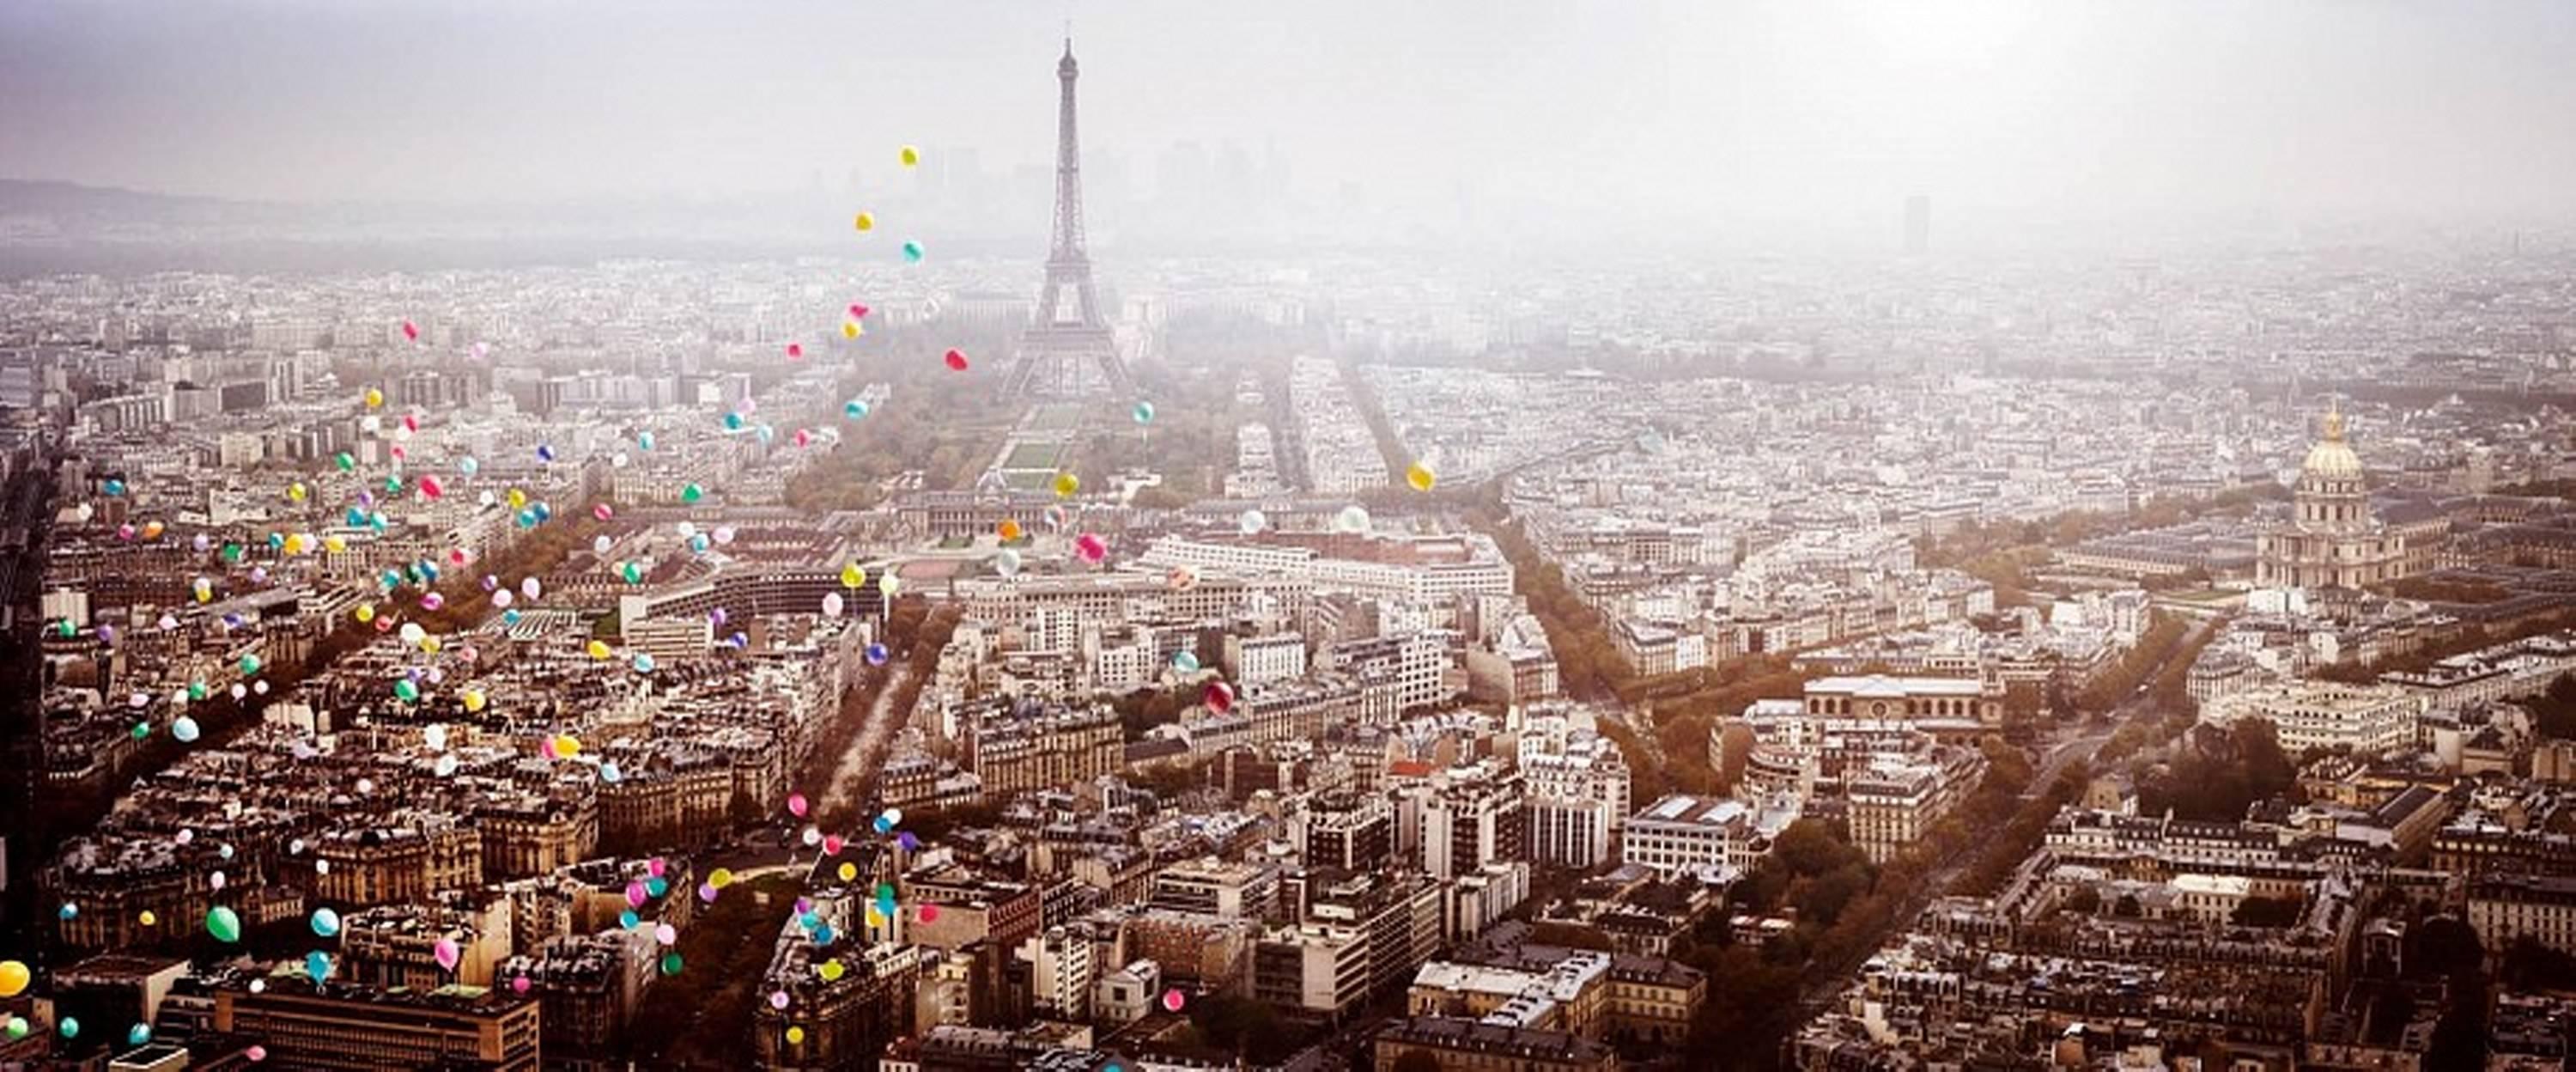 Balloons over Paris (France) - aerial view of Paris with Eiffel Tower balloons 